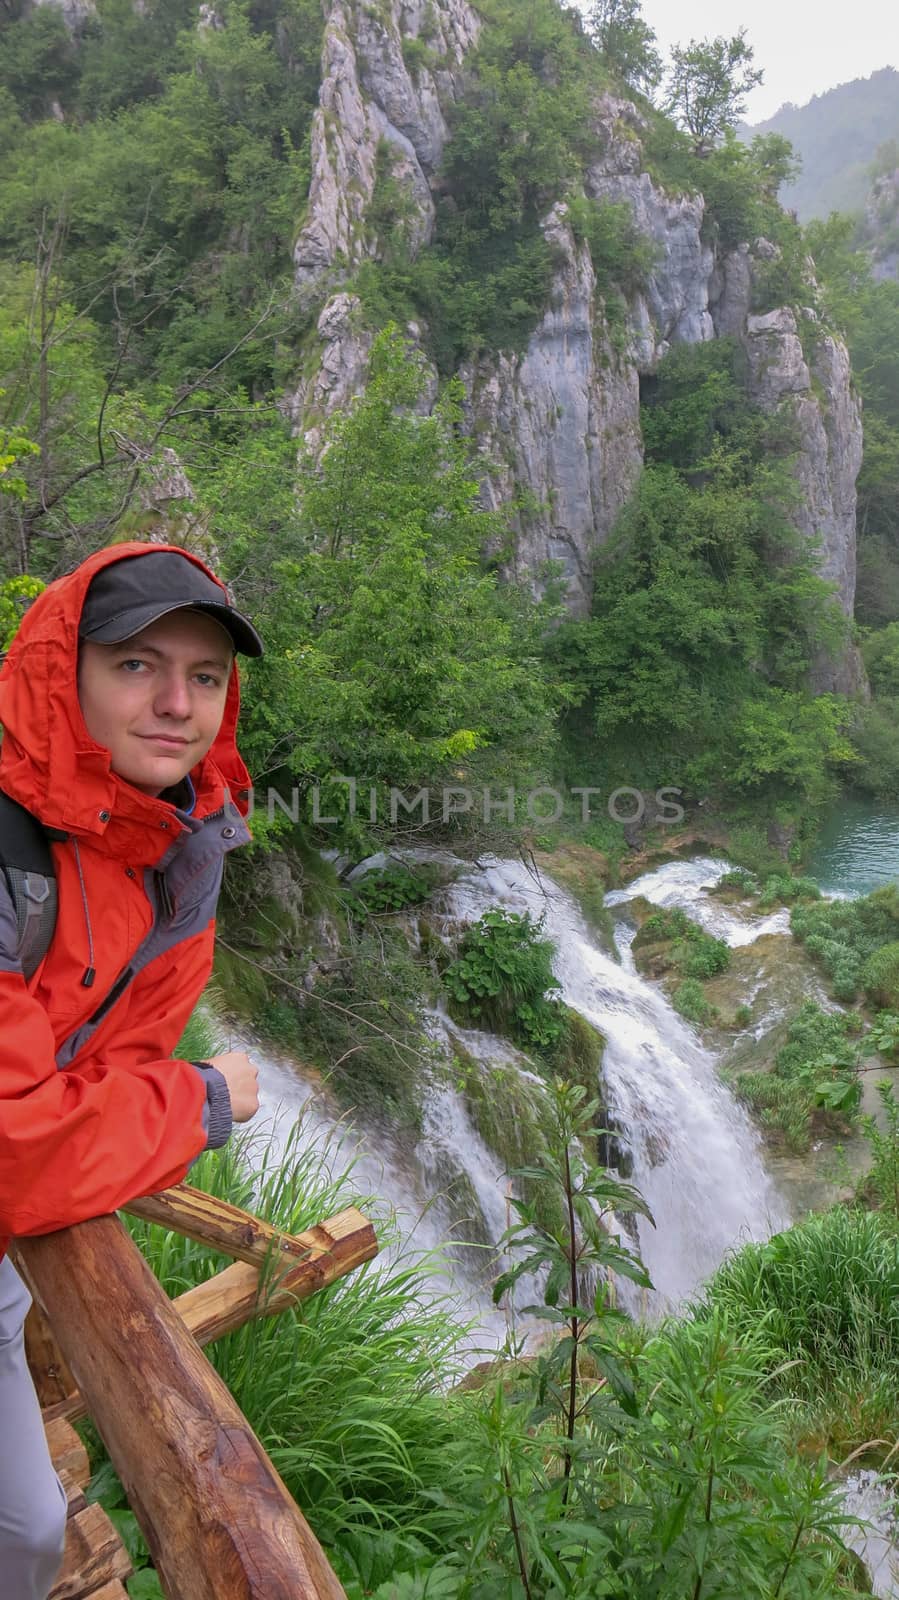 A young man leans on a wooden railing. In the background waterfalls in Plitvice Lakes National Park. Teenager in a red jacket stands against a waterfall.